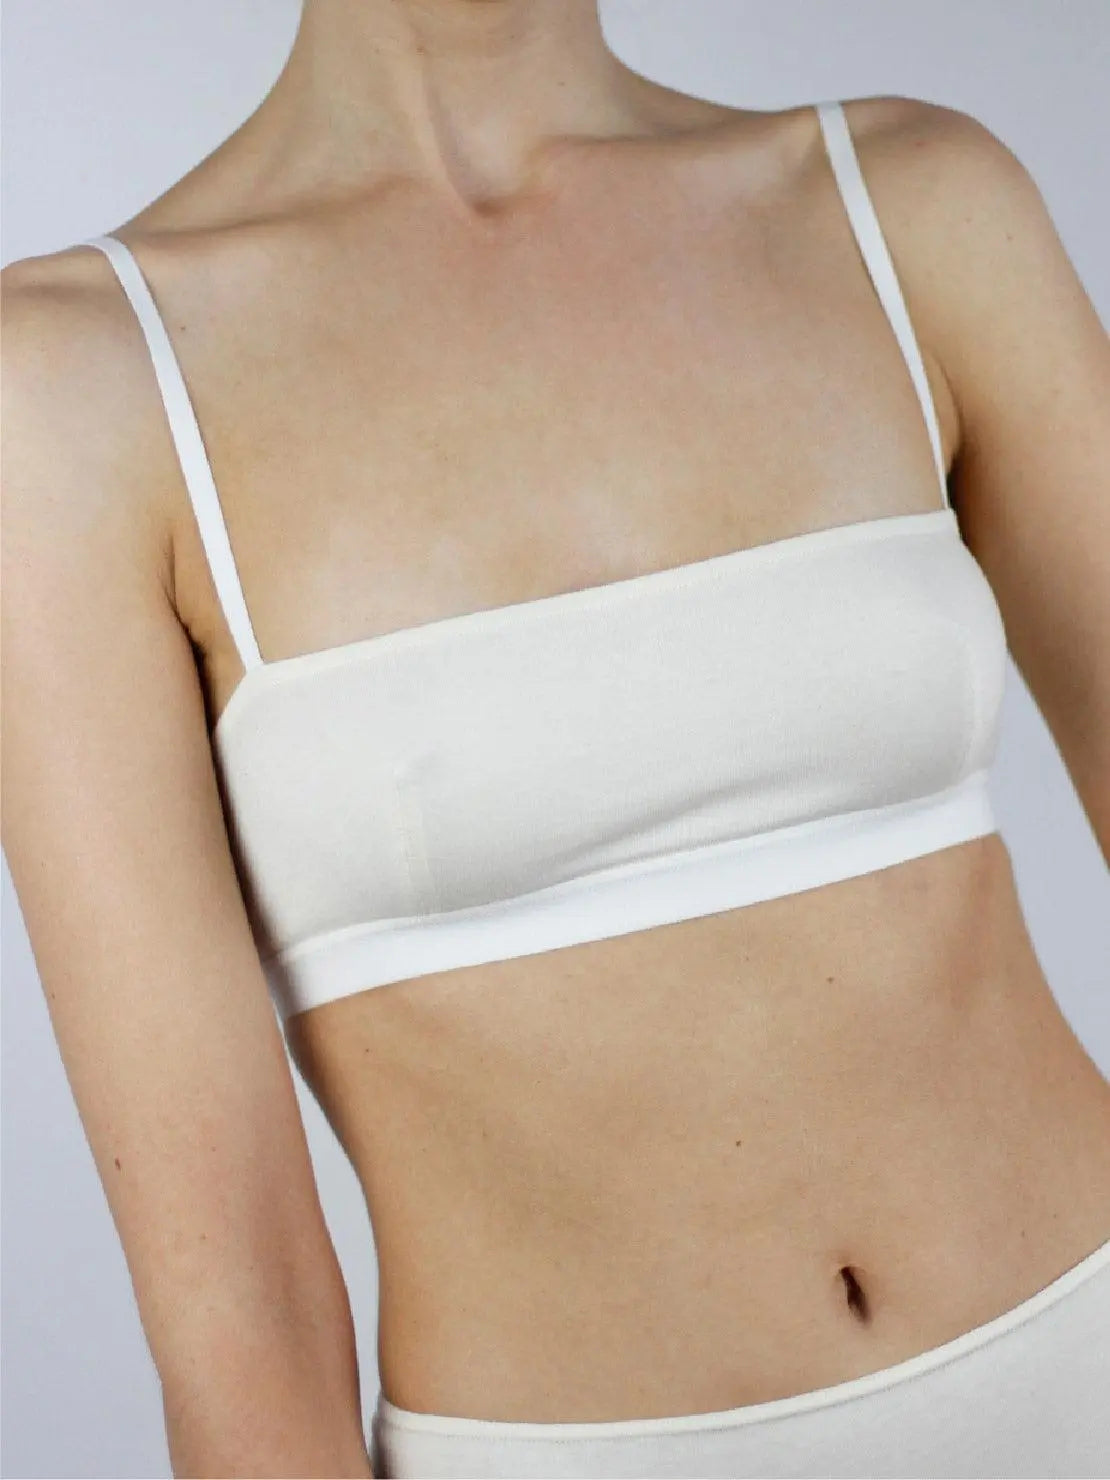 A person is wearing a white, minimalist Ecru Bandeau Organic Cotton Bra - Talk Under Light with thin straps. The image focuses on the upper torso, revealing the bra's simple and clean design. The background is a plain light grey, enhancing the focus on the Ecru Bandeau Organic Cotton Bra - Talk Under Light, available exclusively at BassalStore Barcelona.